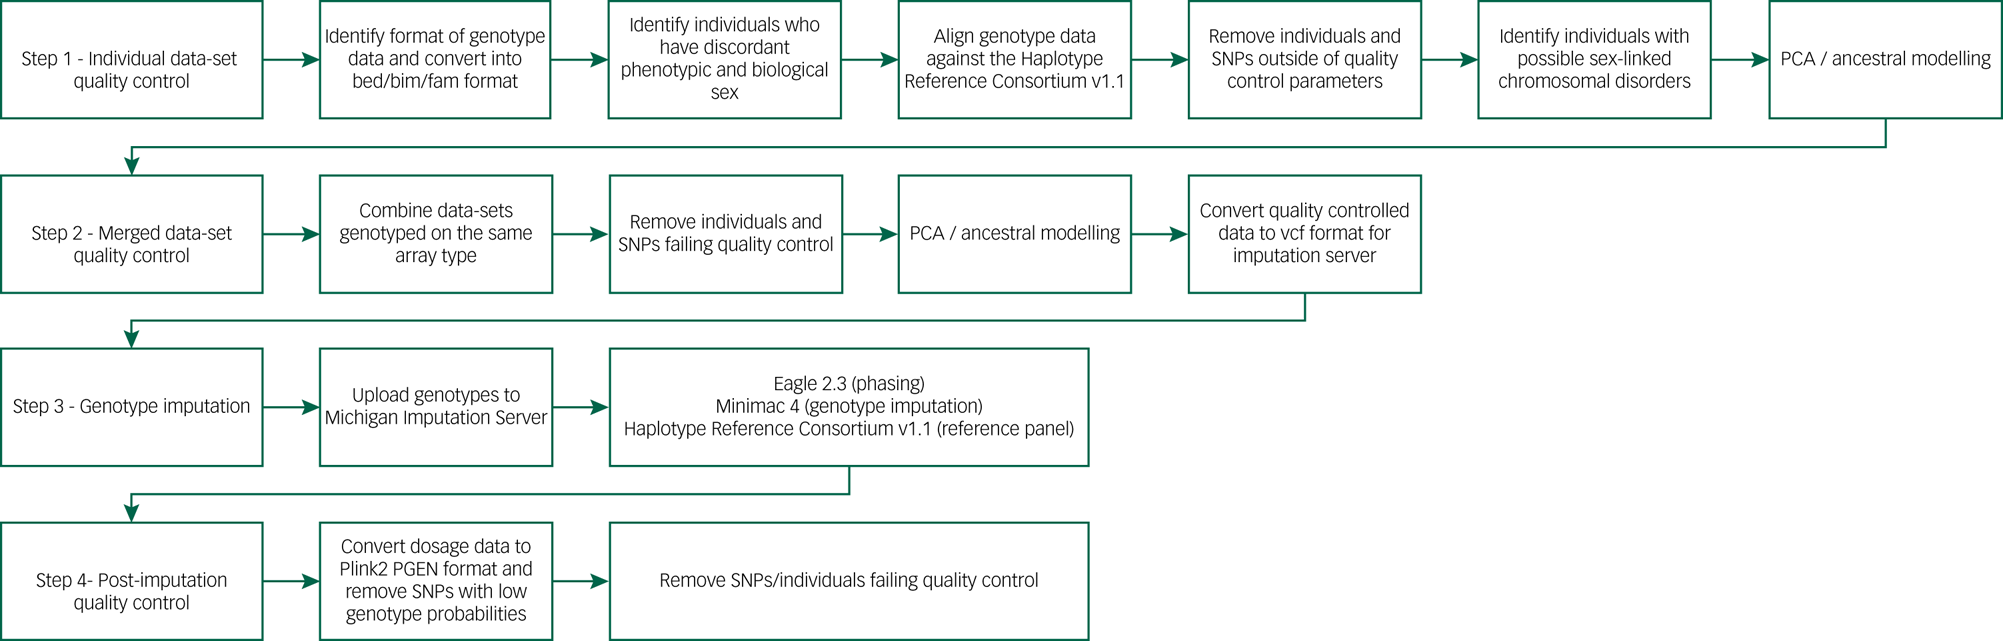 DRAGON-Data: a platform and protocol for integrating genomic and phenotypic  data across large psychiatric cohorts, BJPsych Open